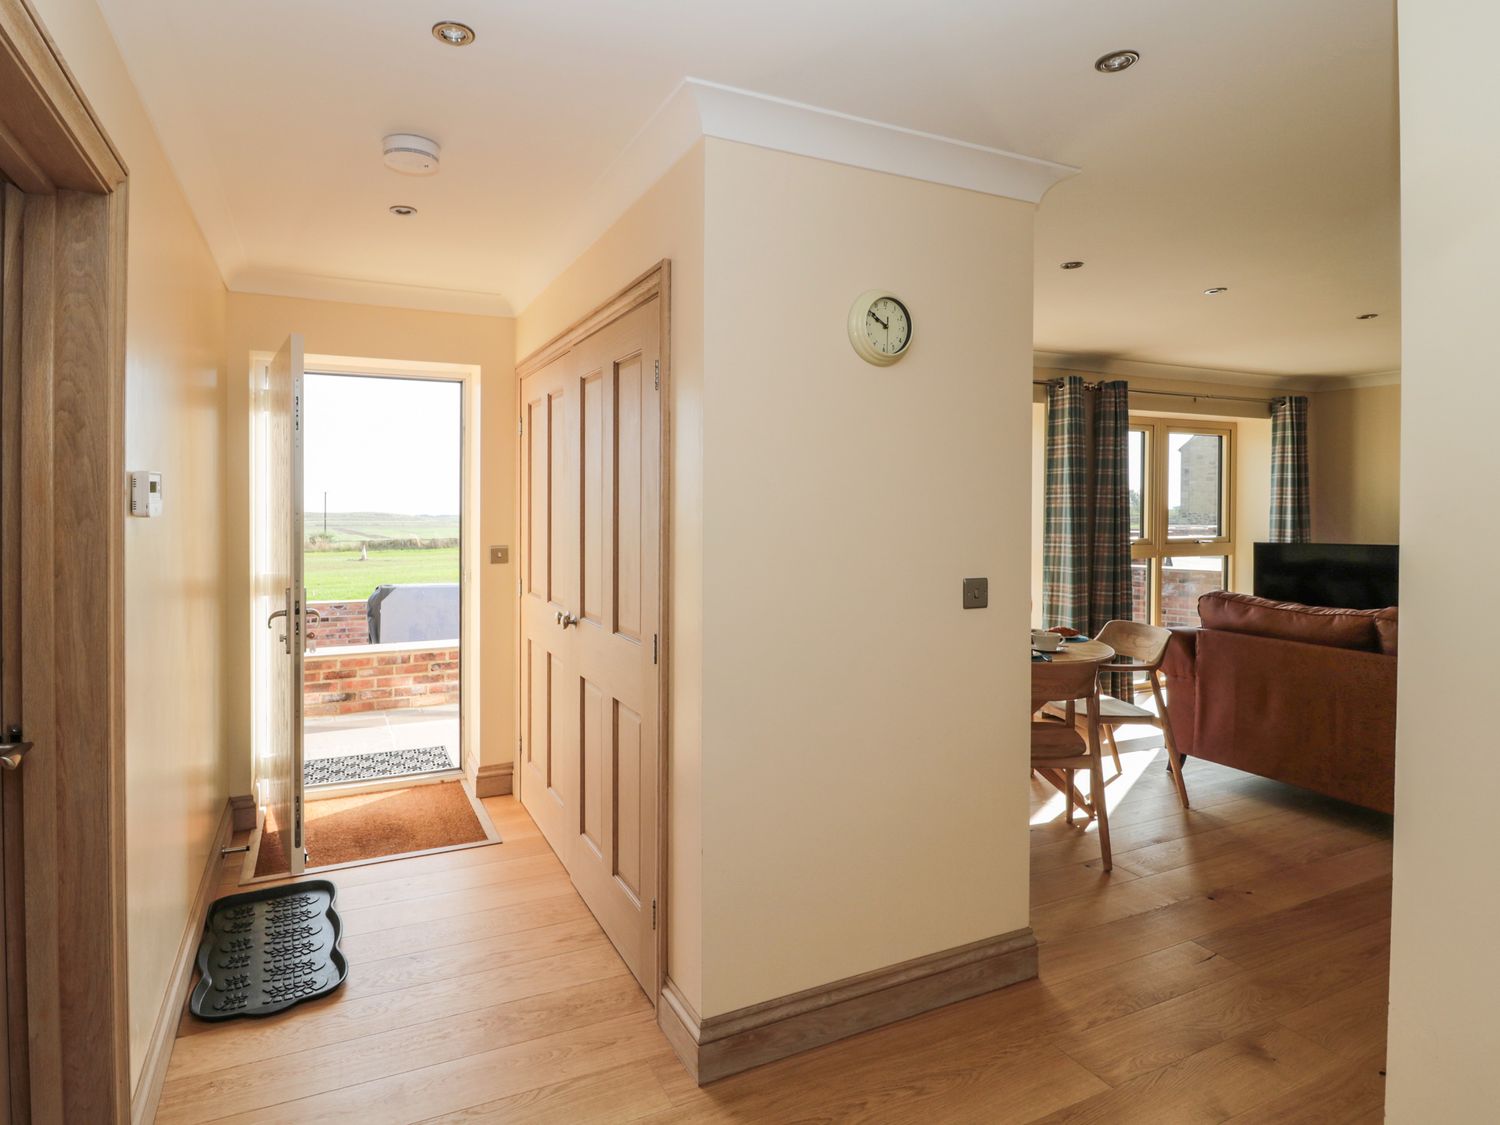 Byre Cottage in Embleton, Northumberland. Single-storey. Child-friendly. Spacious patio with hot tub